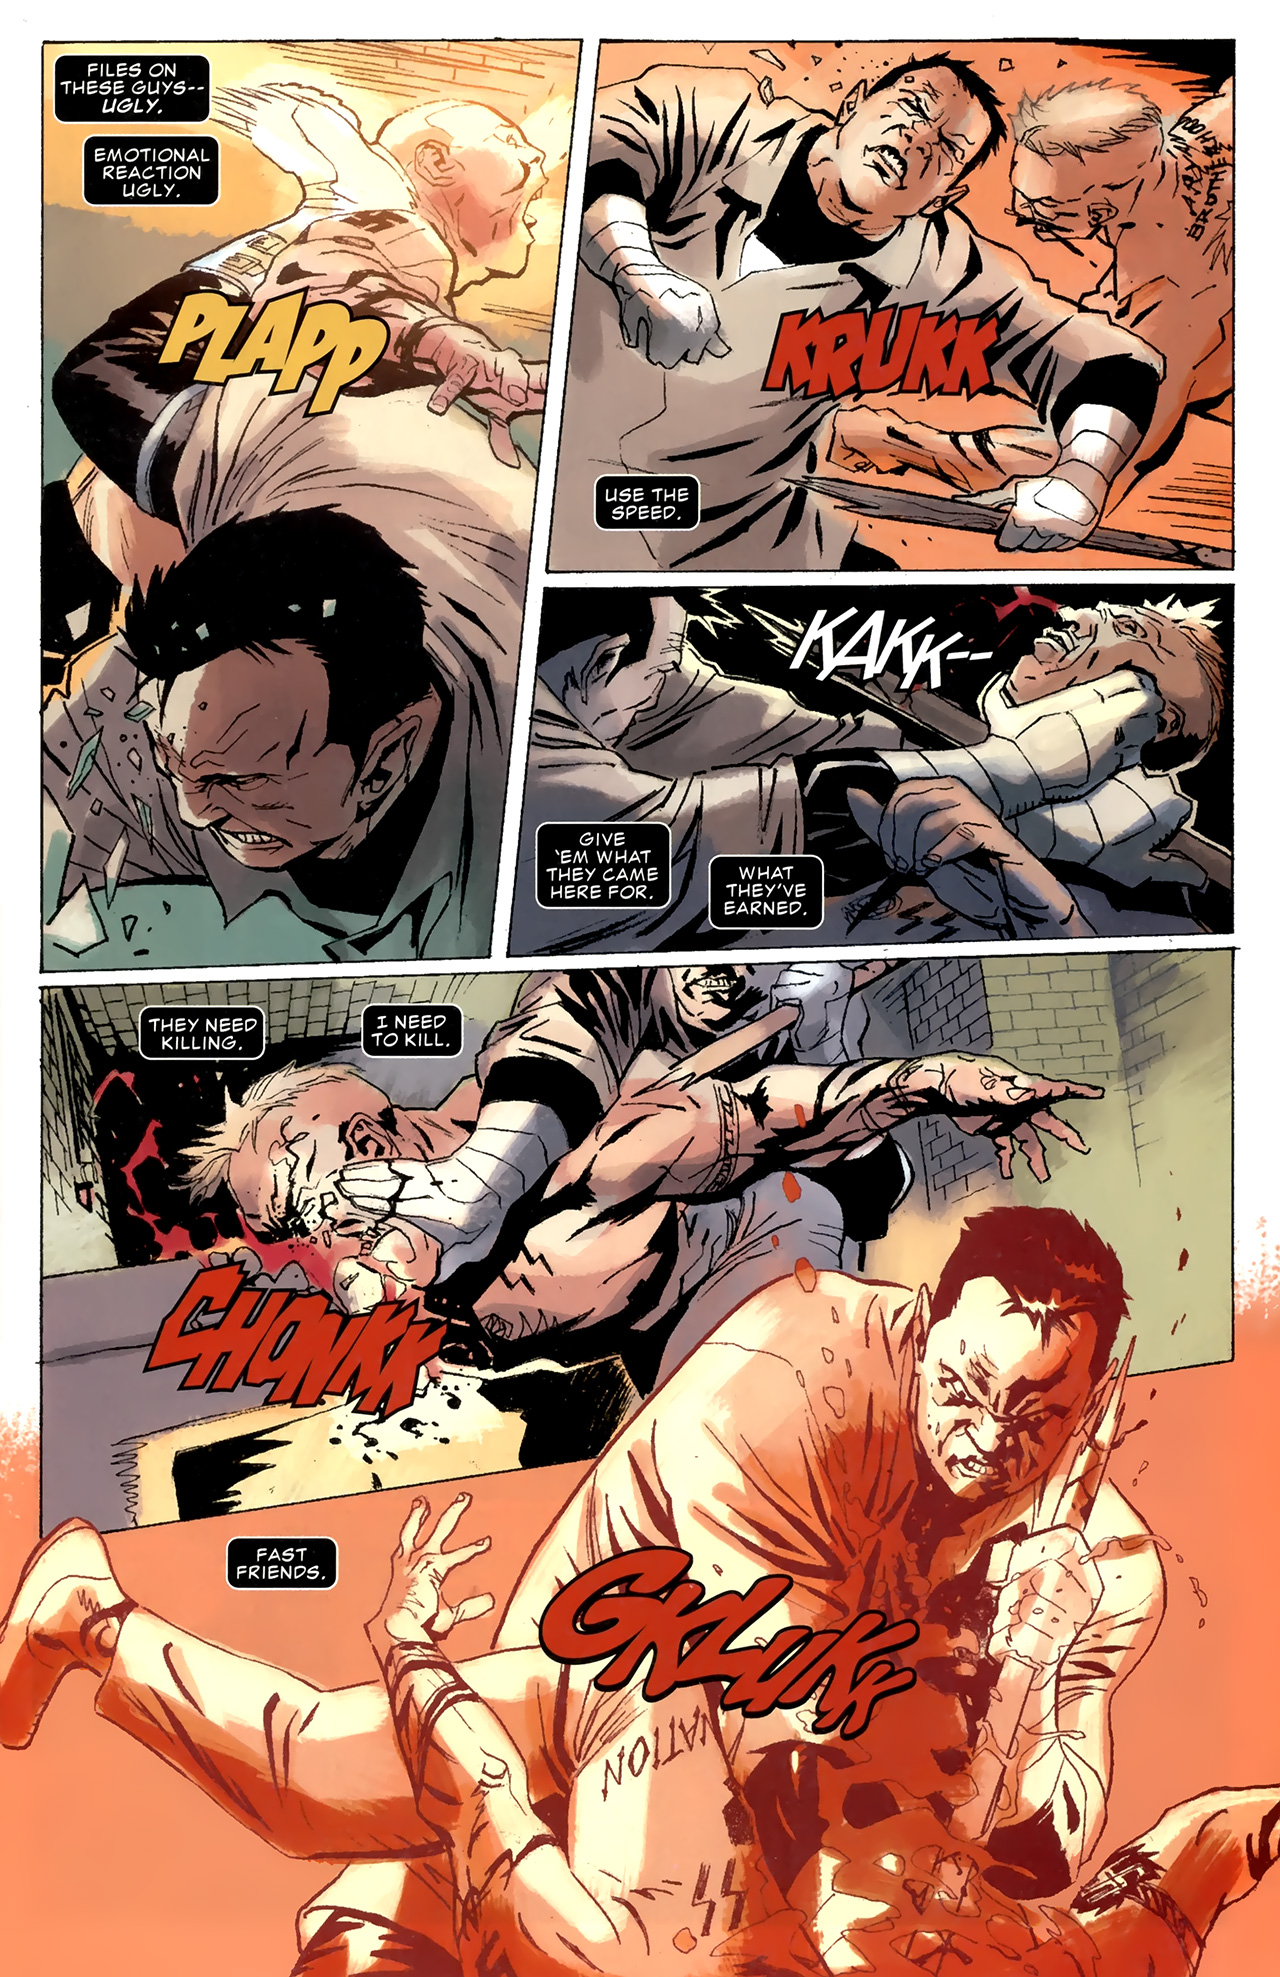 Punisher: In The Blood #1 - In The Blood, Part One